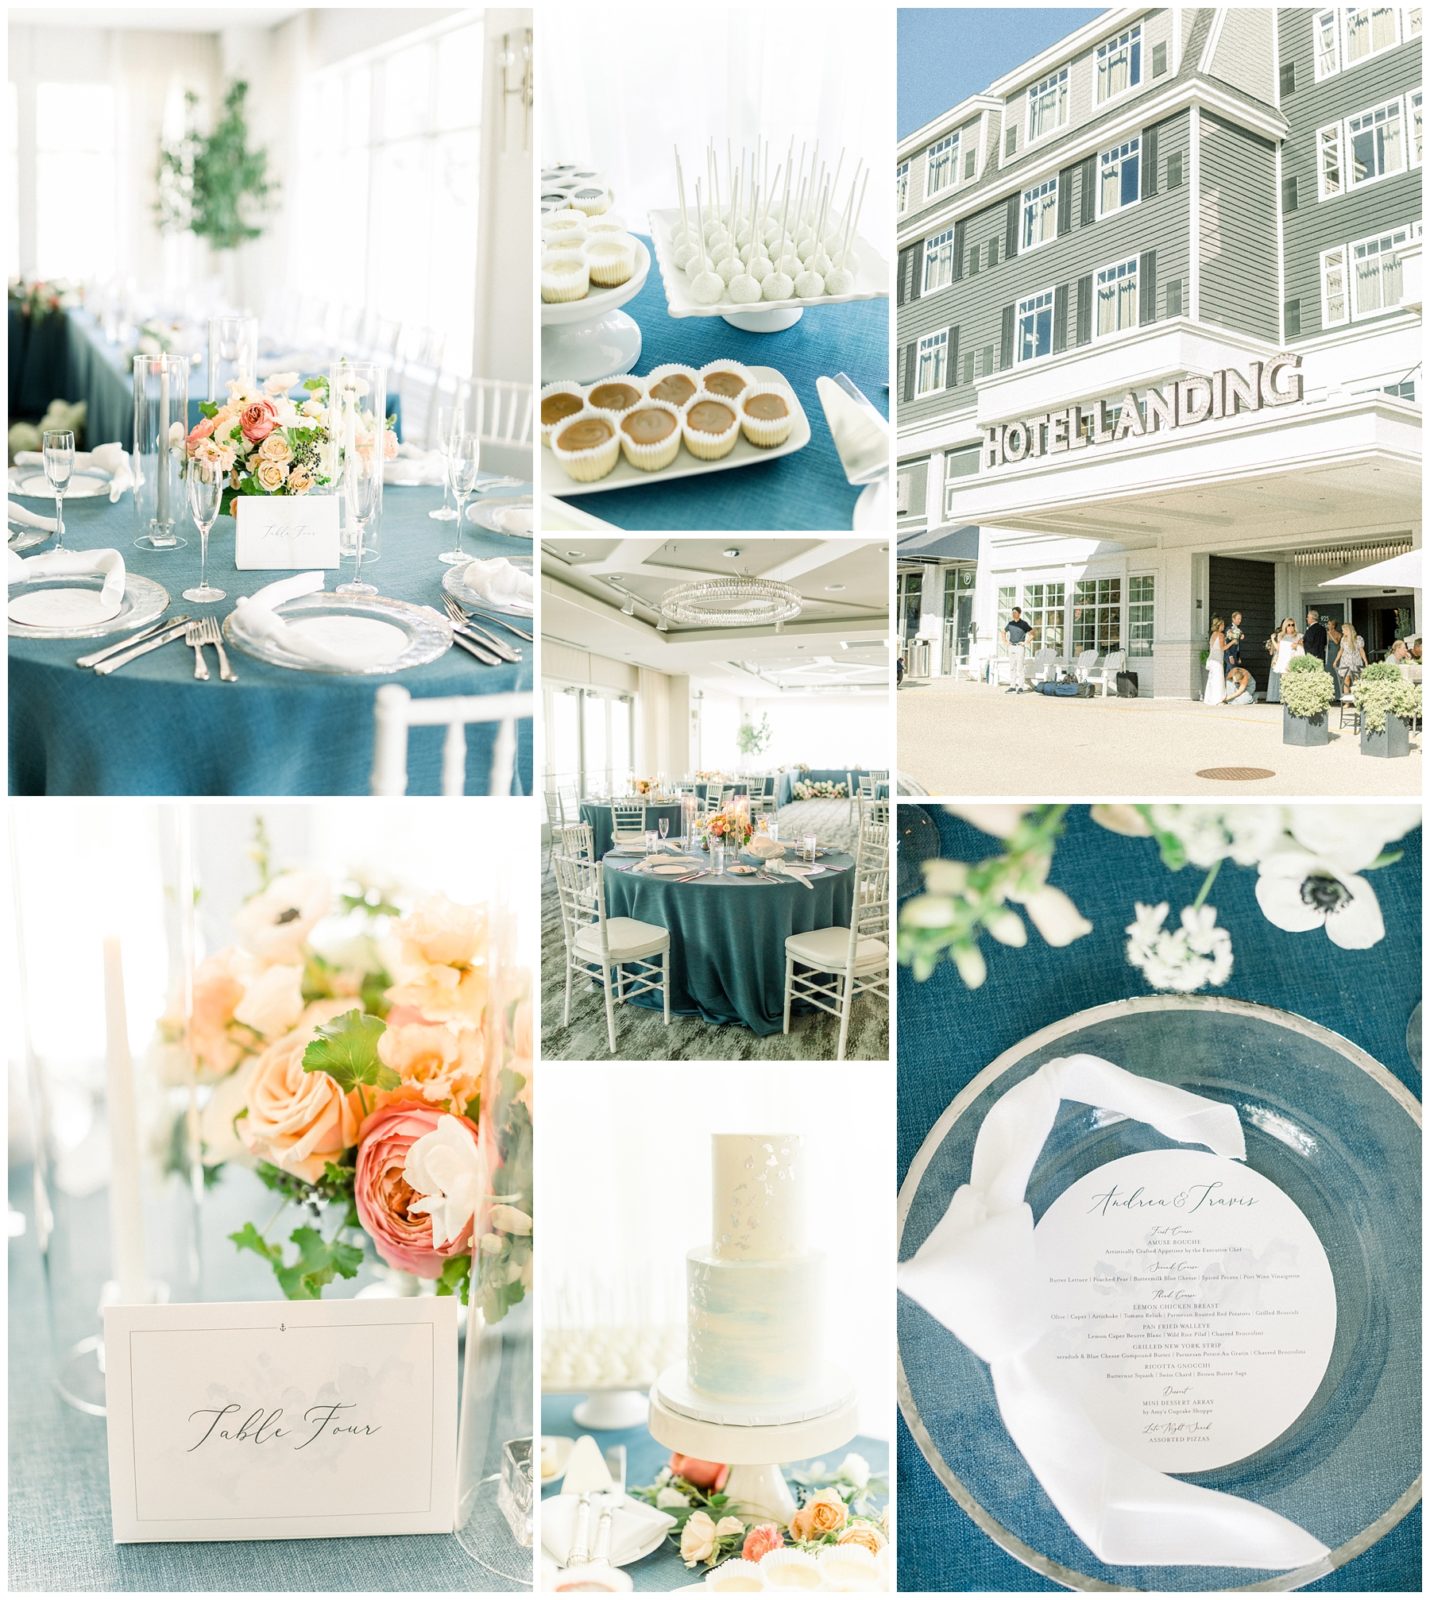 Wedding Details in Shades of Blue